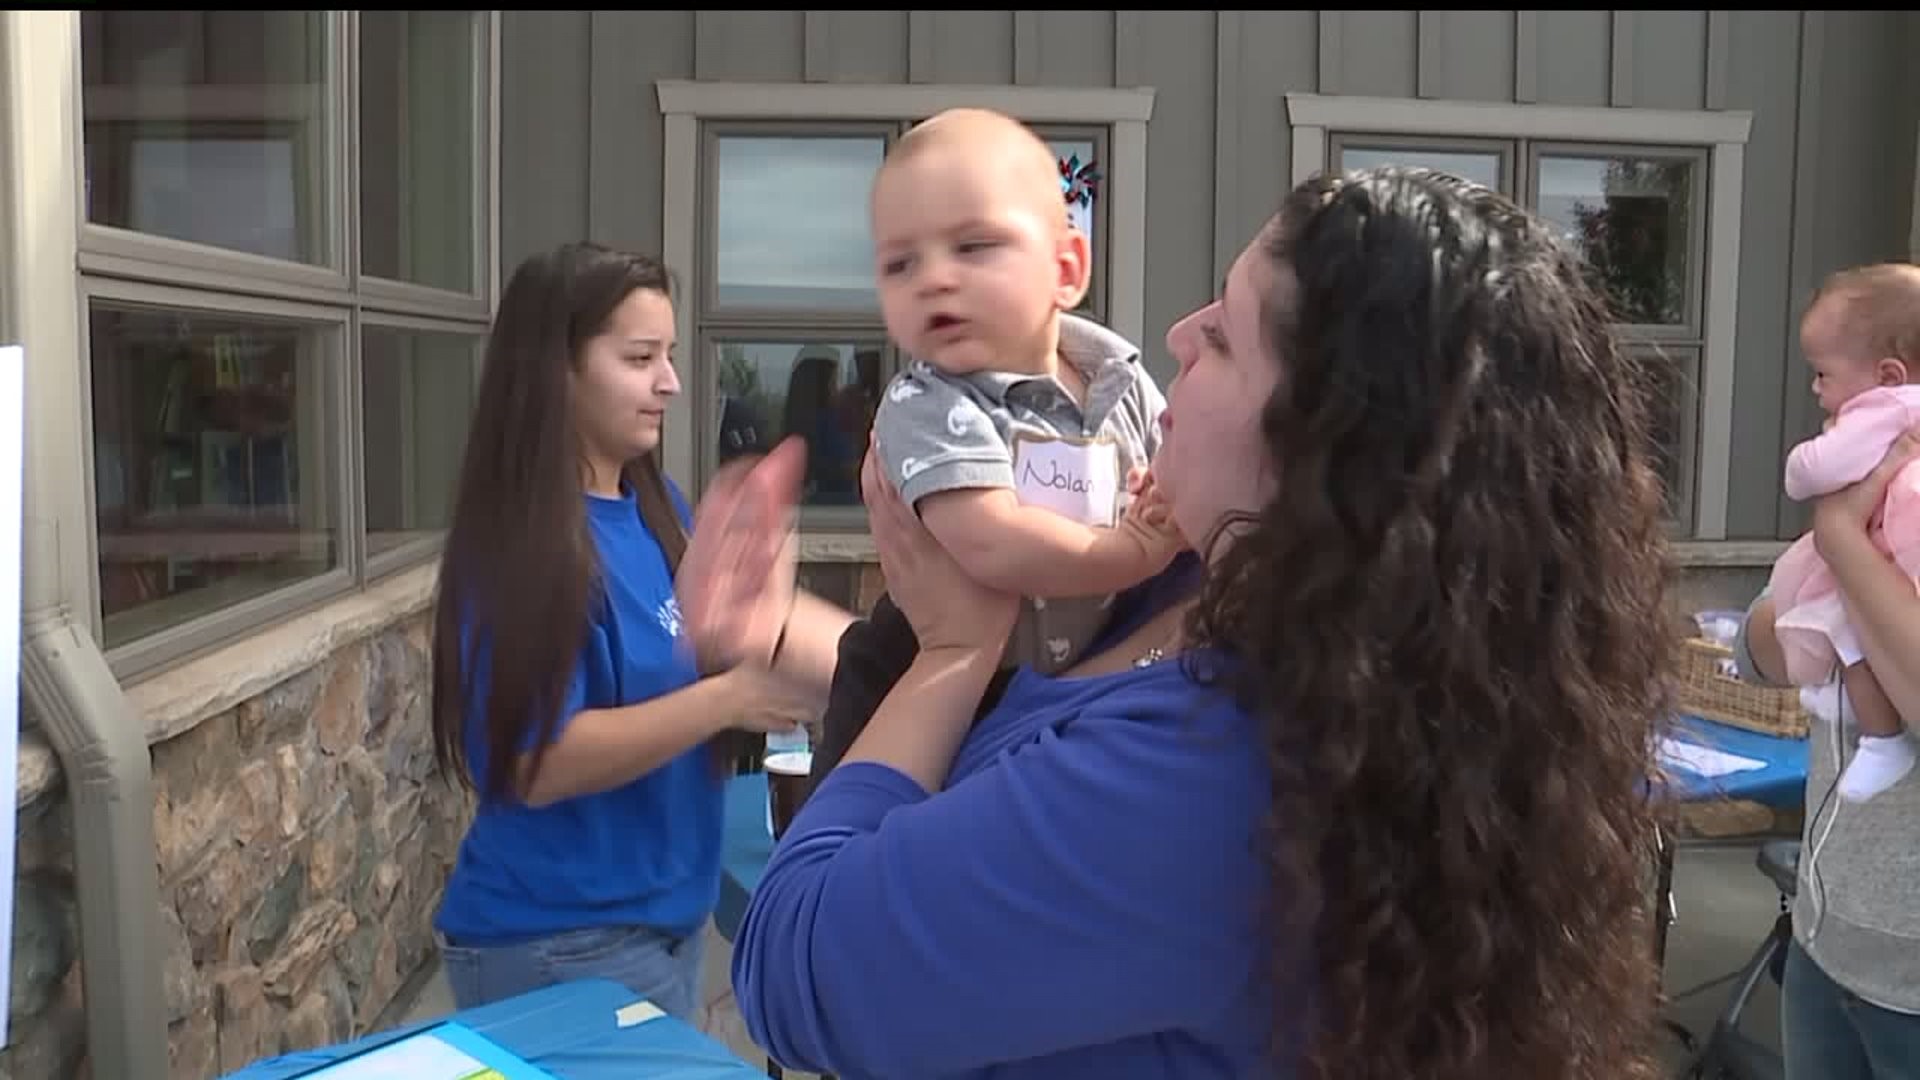 NICU families and staff gather in York County to support each other